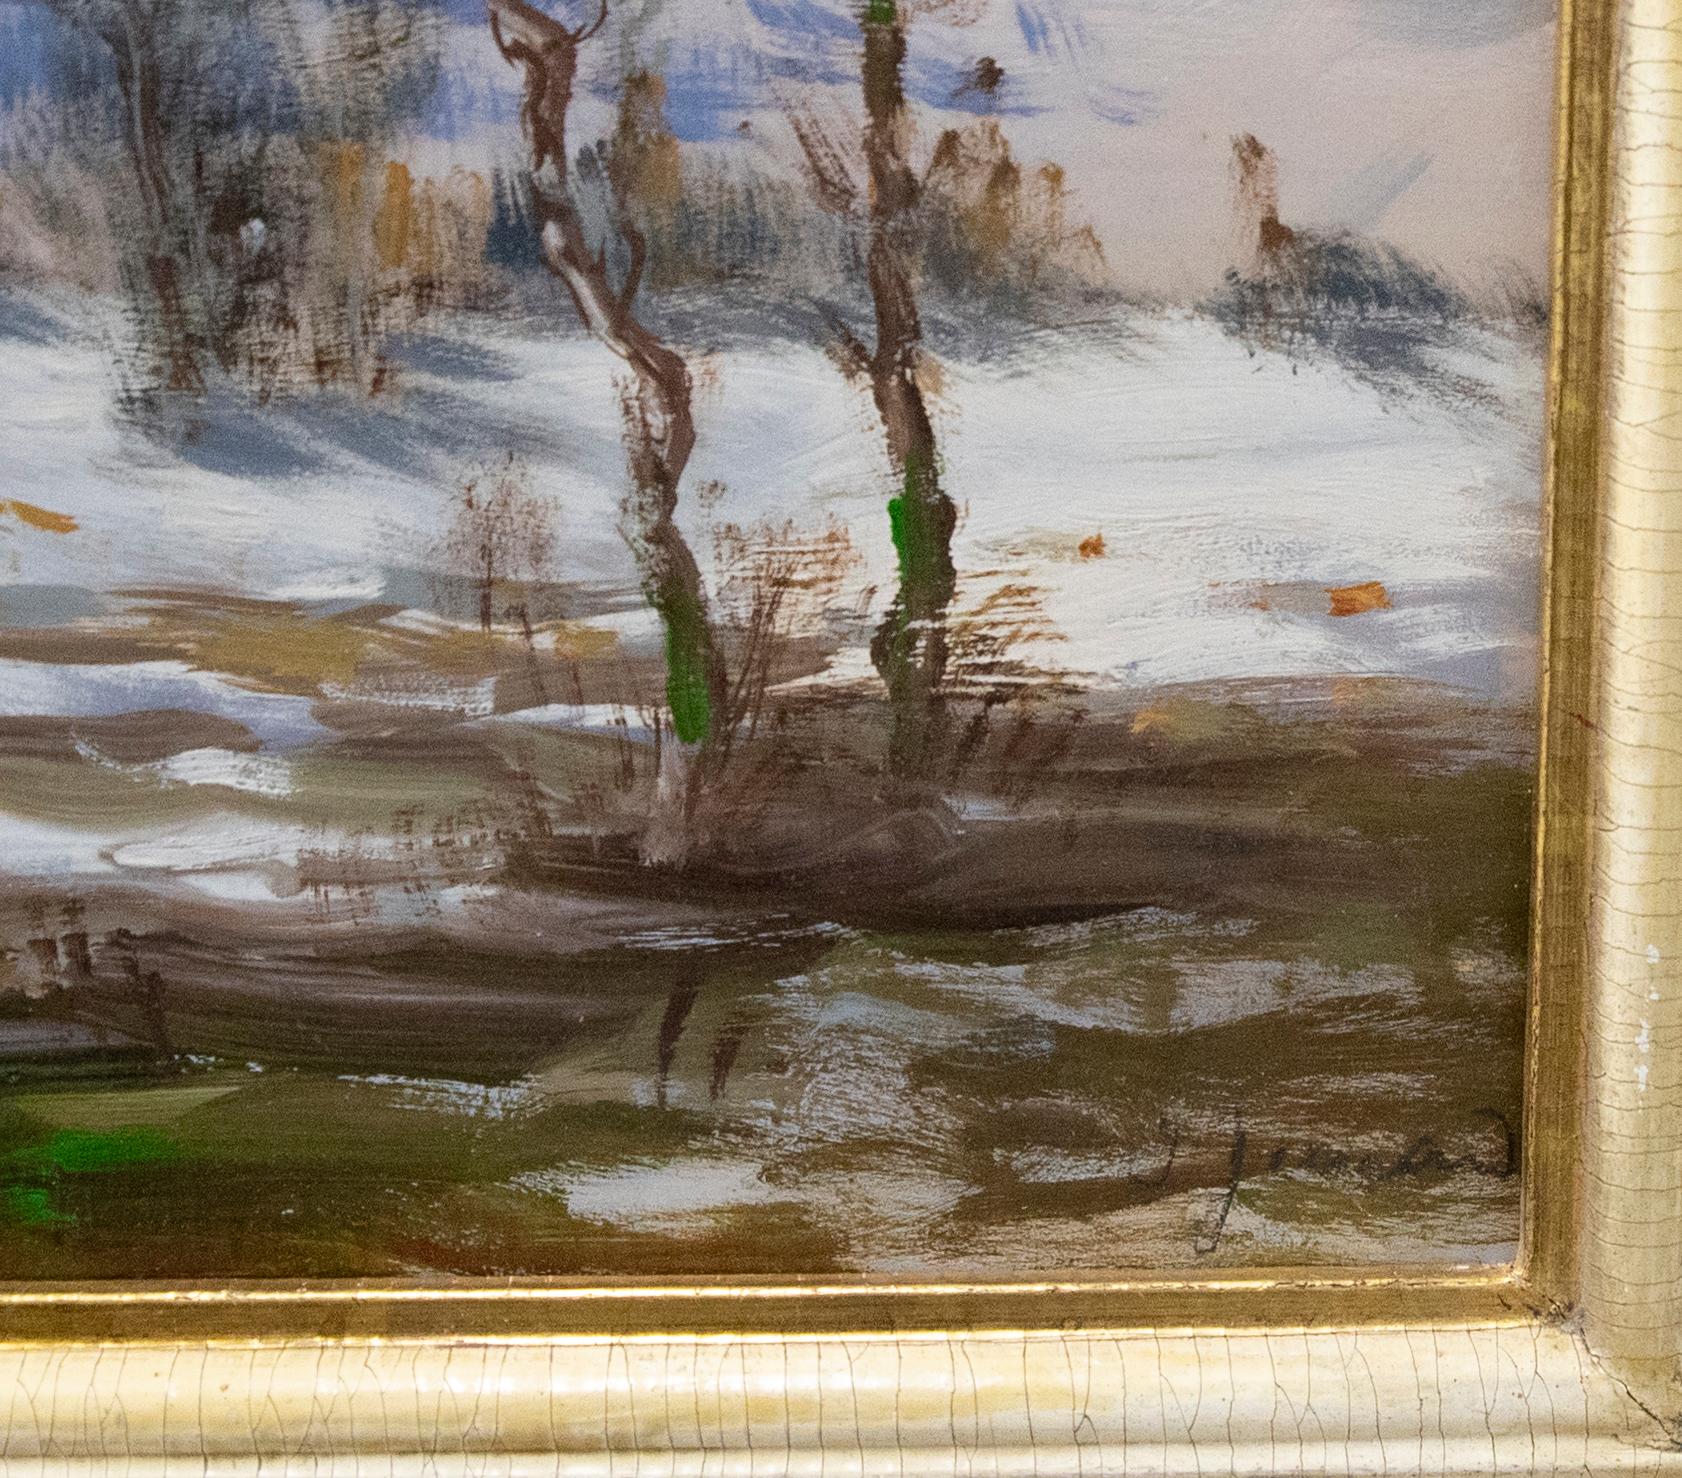 A charming winter scene depicting snow laden field in Ste. Adelle, Quebec in Canada. To the distance a farm house sits in the winter landscape surrounded by trees and looking out to distant mountains. Signed illegibly to the lower right. Presented